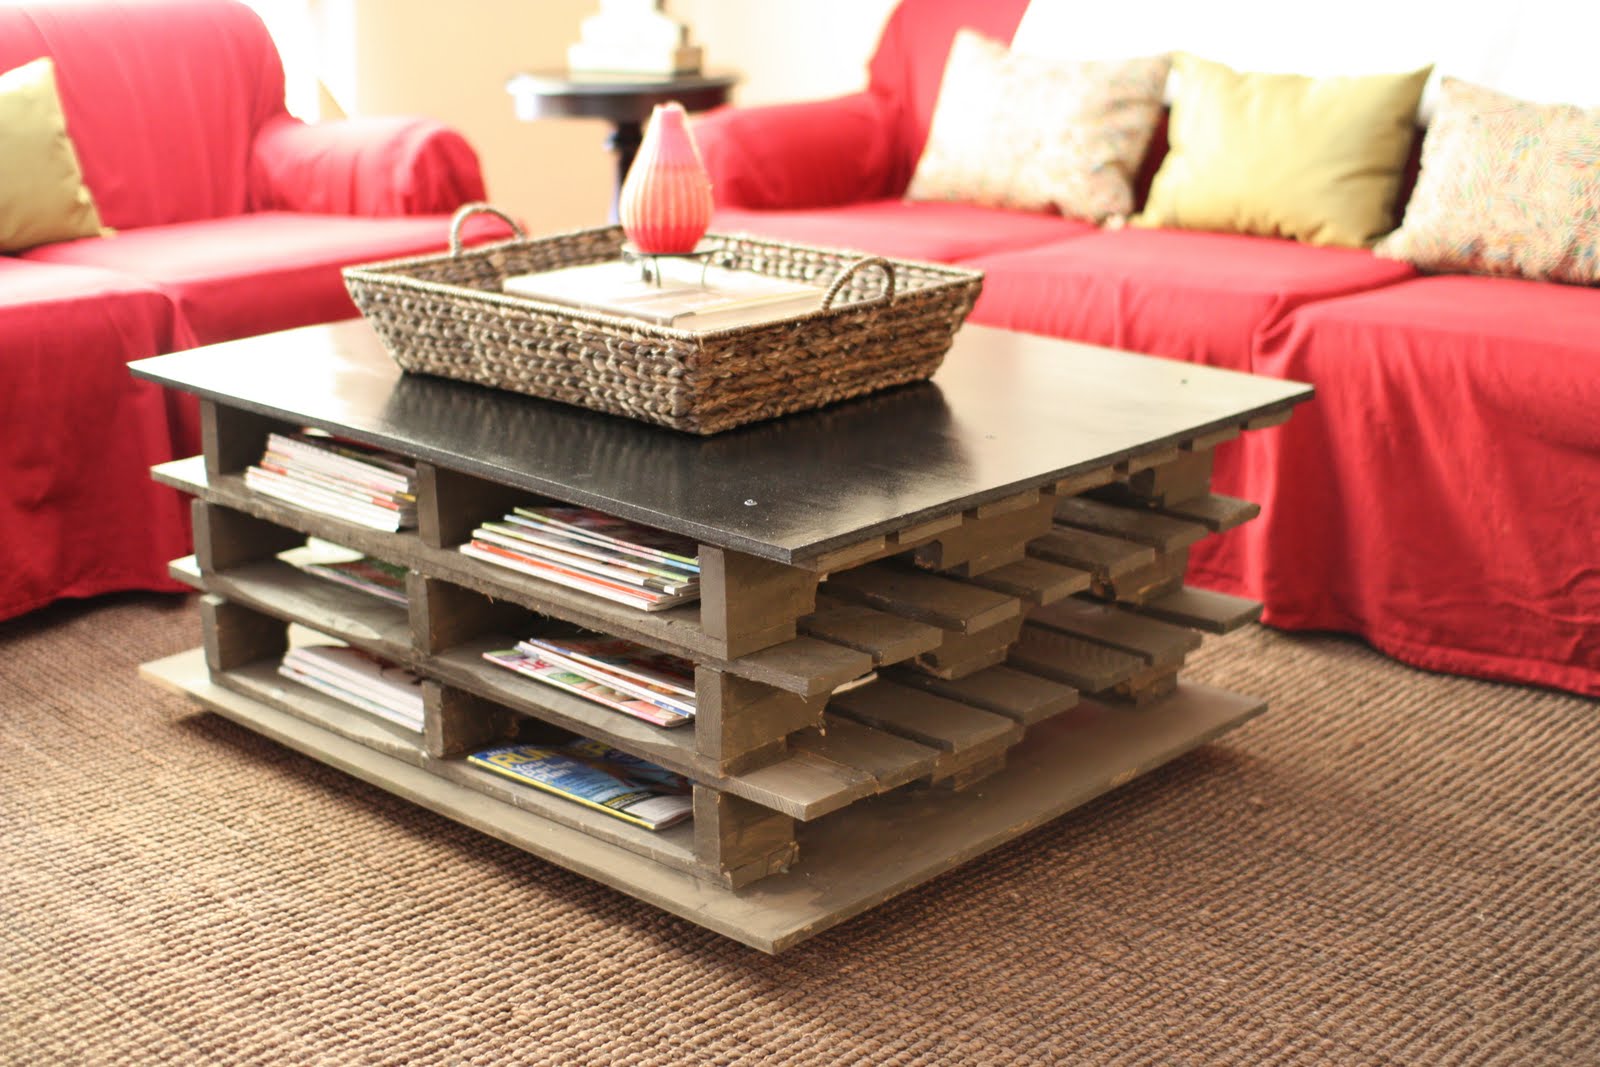 Wood Pallet Coffee Table Project